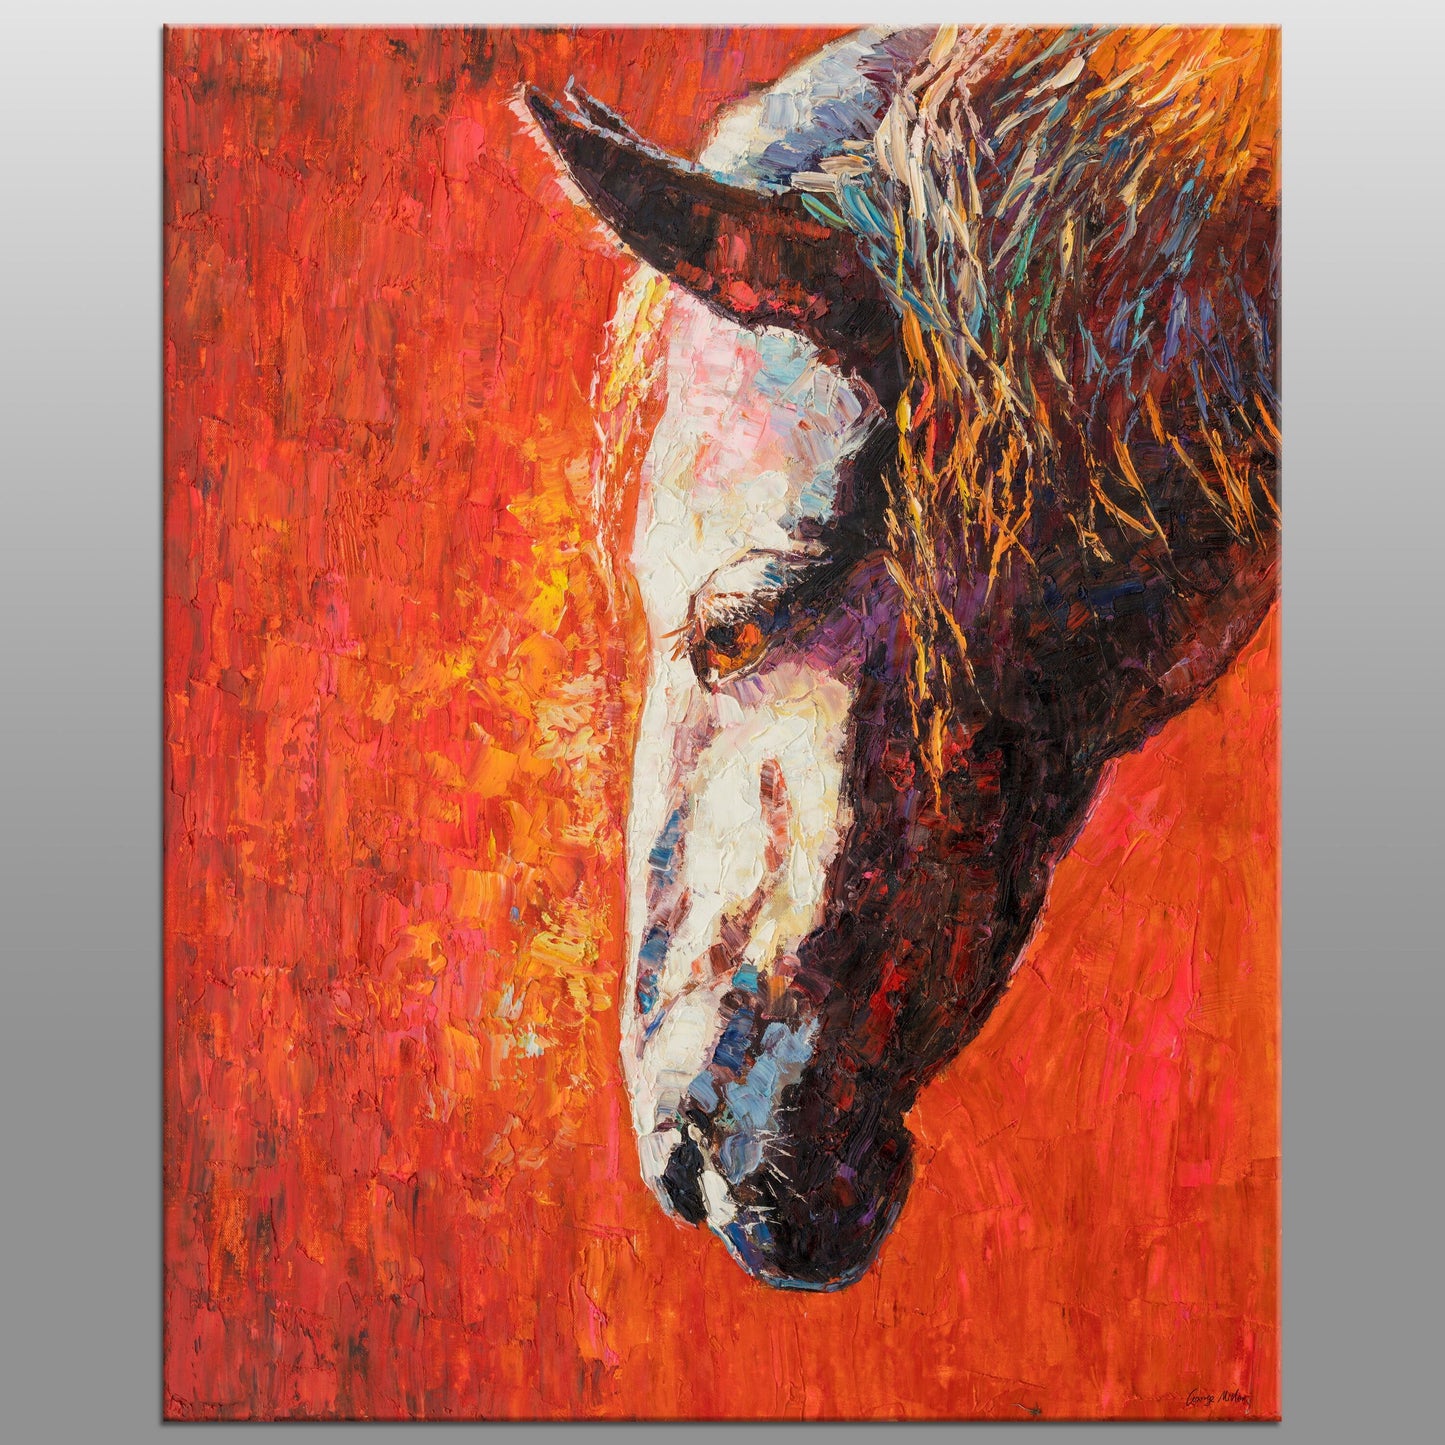 Large Horse Art Painting: Modern Abstract Oil - 32x48 inches - Living Room Wall Decor, Coffee Wall Art, Living Room Wall Art